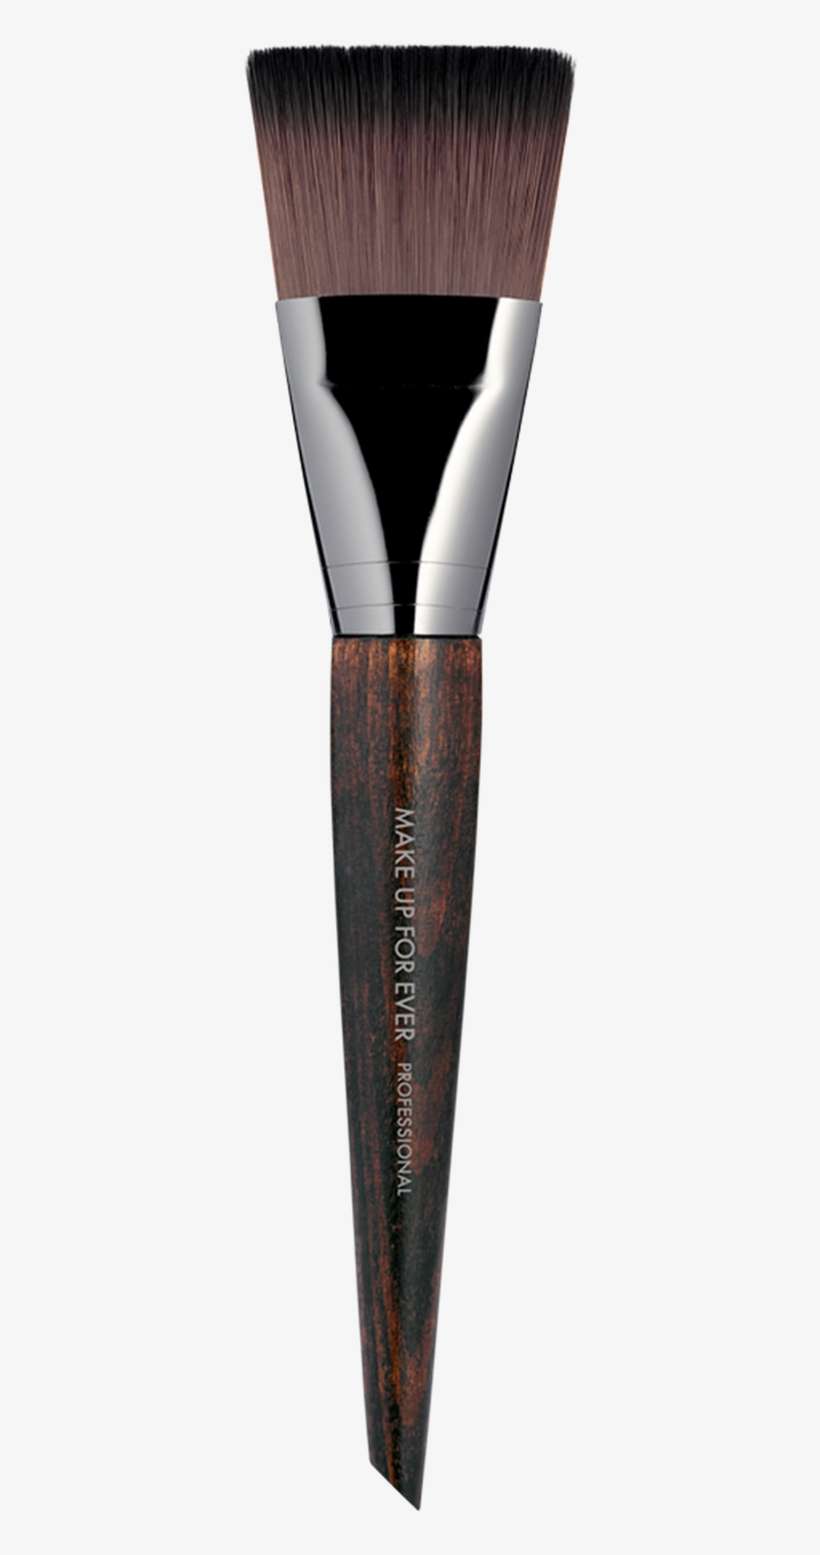 Make Up For Ever Artistic Brushes, Small - Make Up For Ever 410 Medium Body Foundation Brush, transparent png #691804